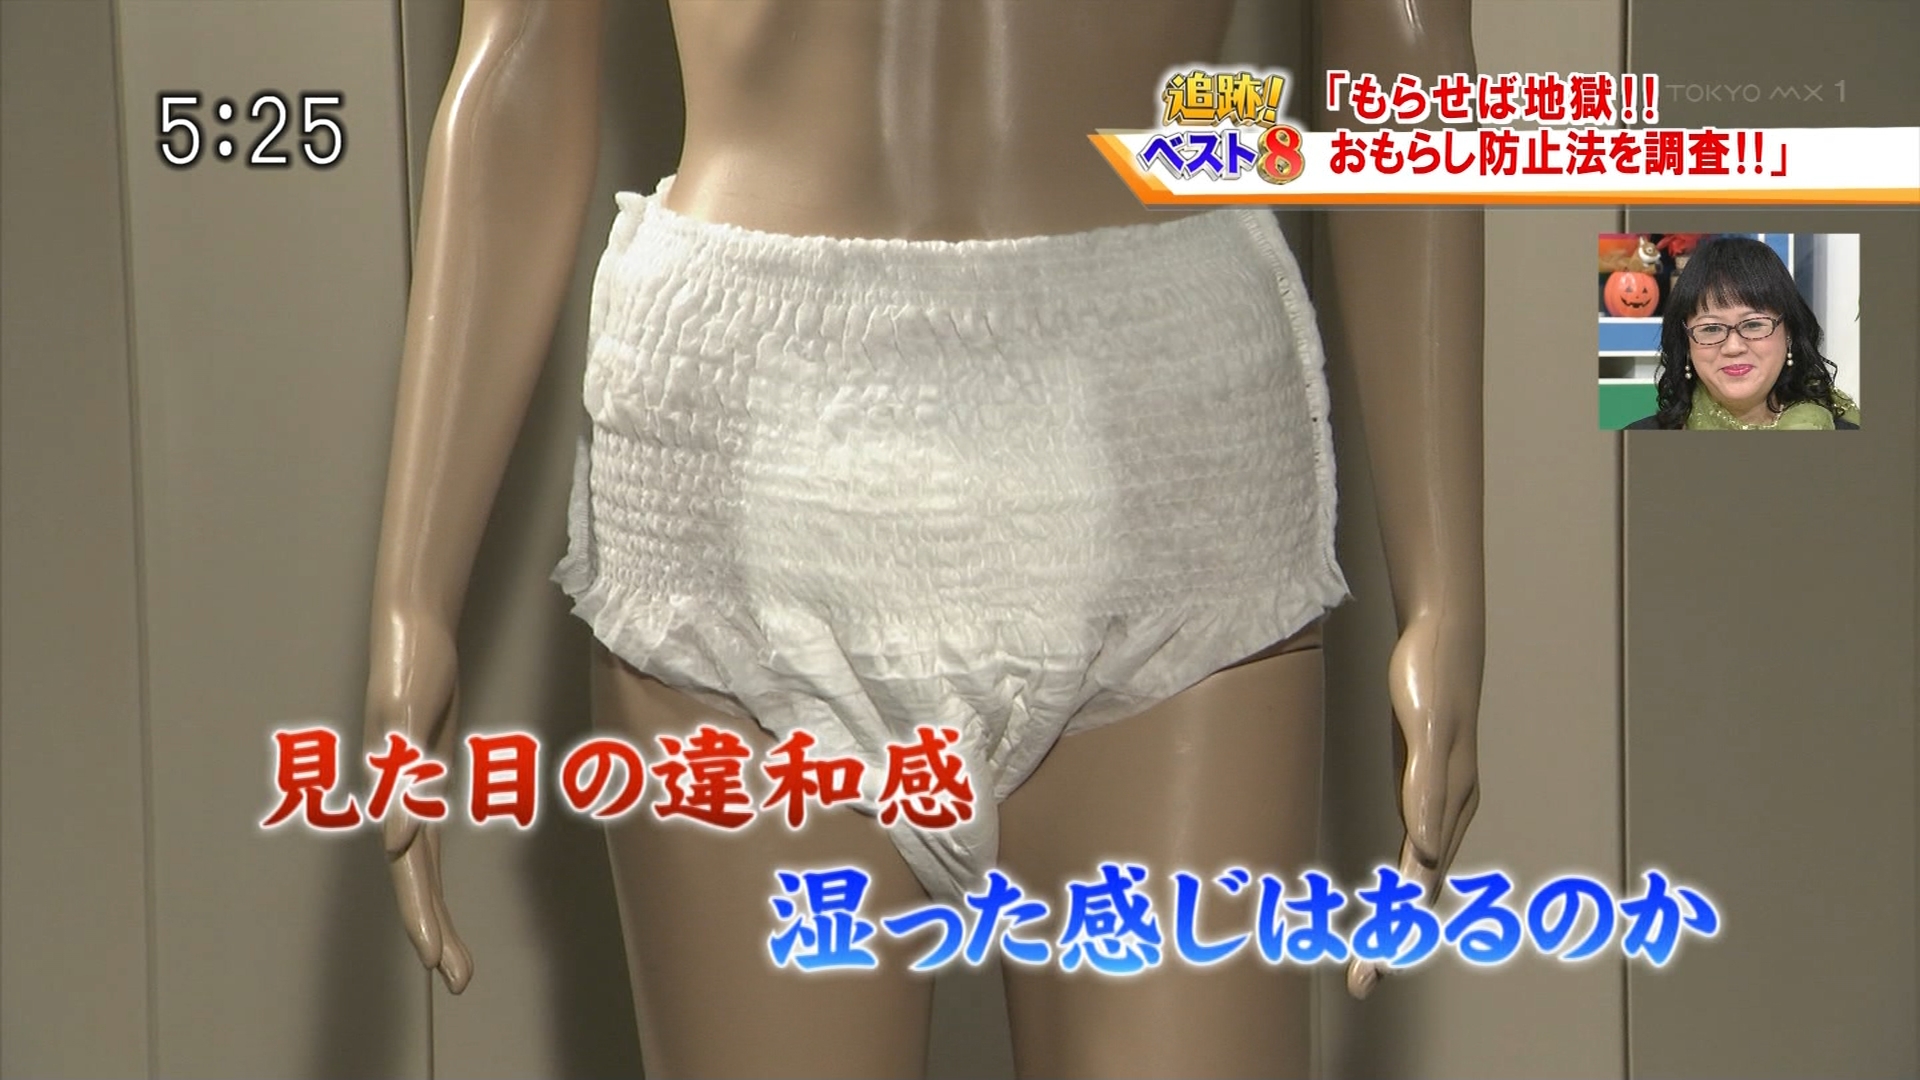 The Best Looking Adult Diaper Test You’ll See Today